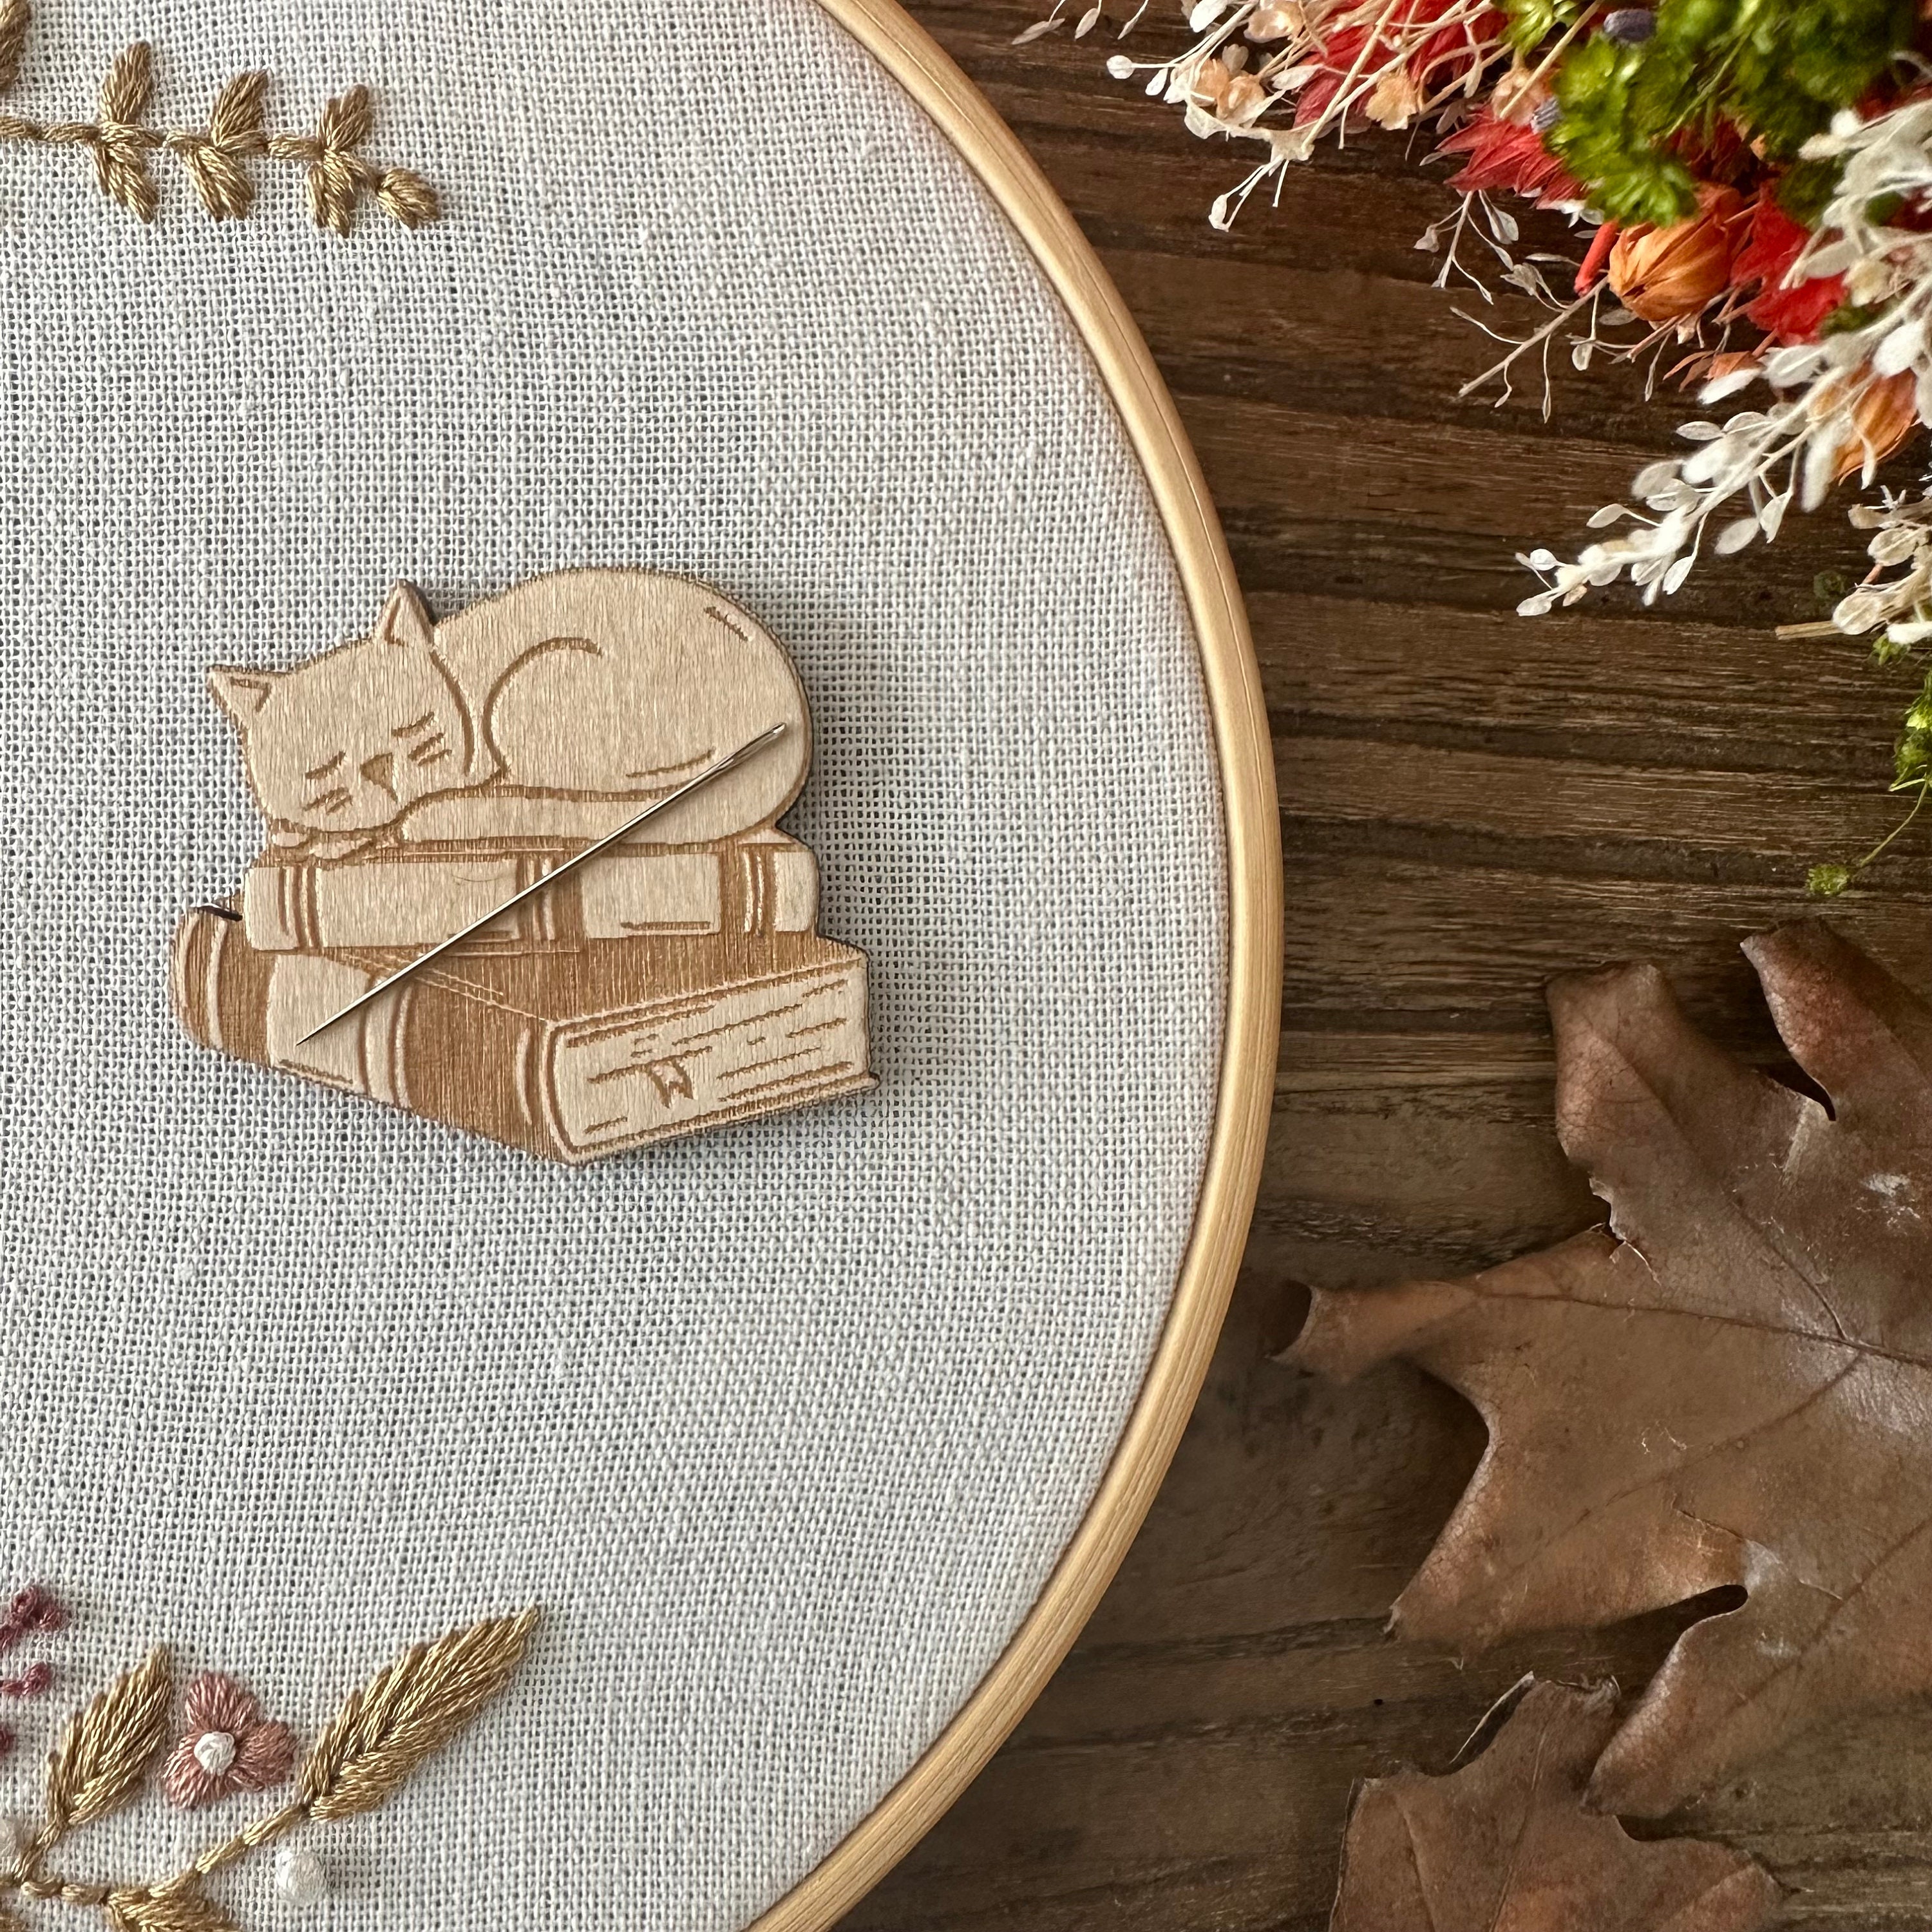 Needle Minders – Kitty With A Cupcake